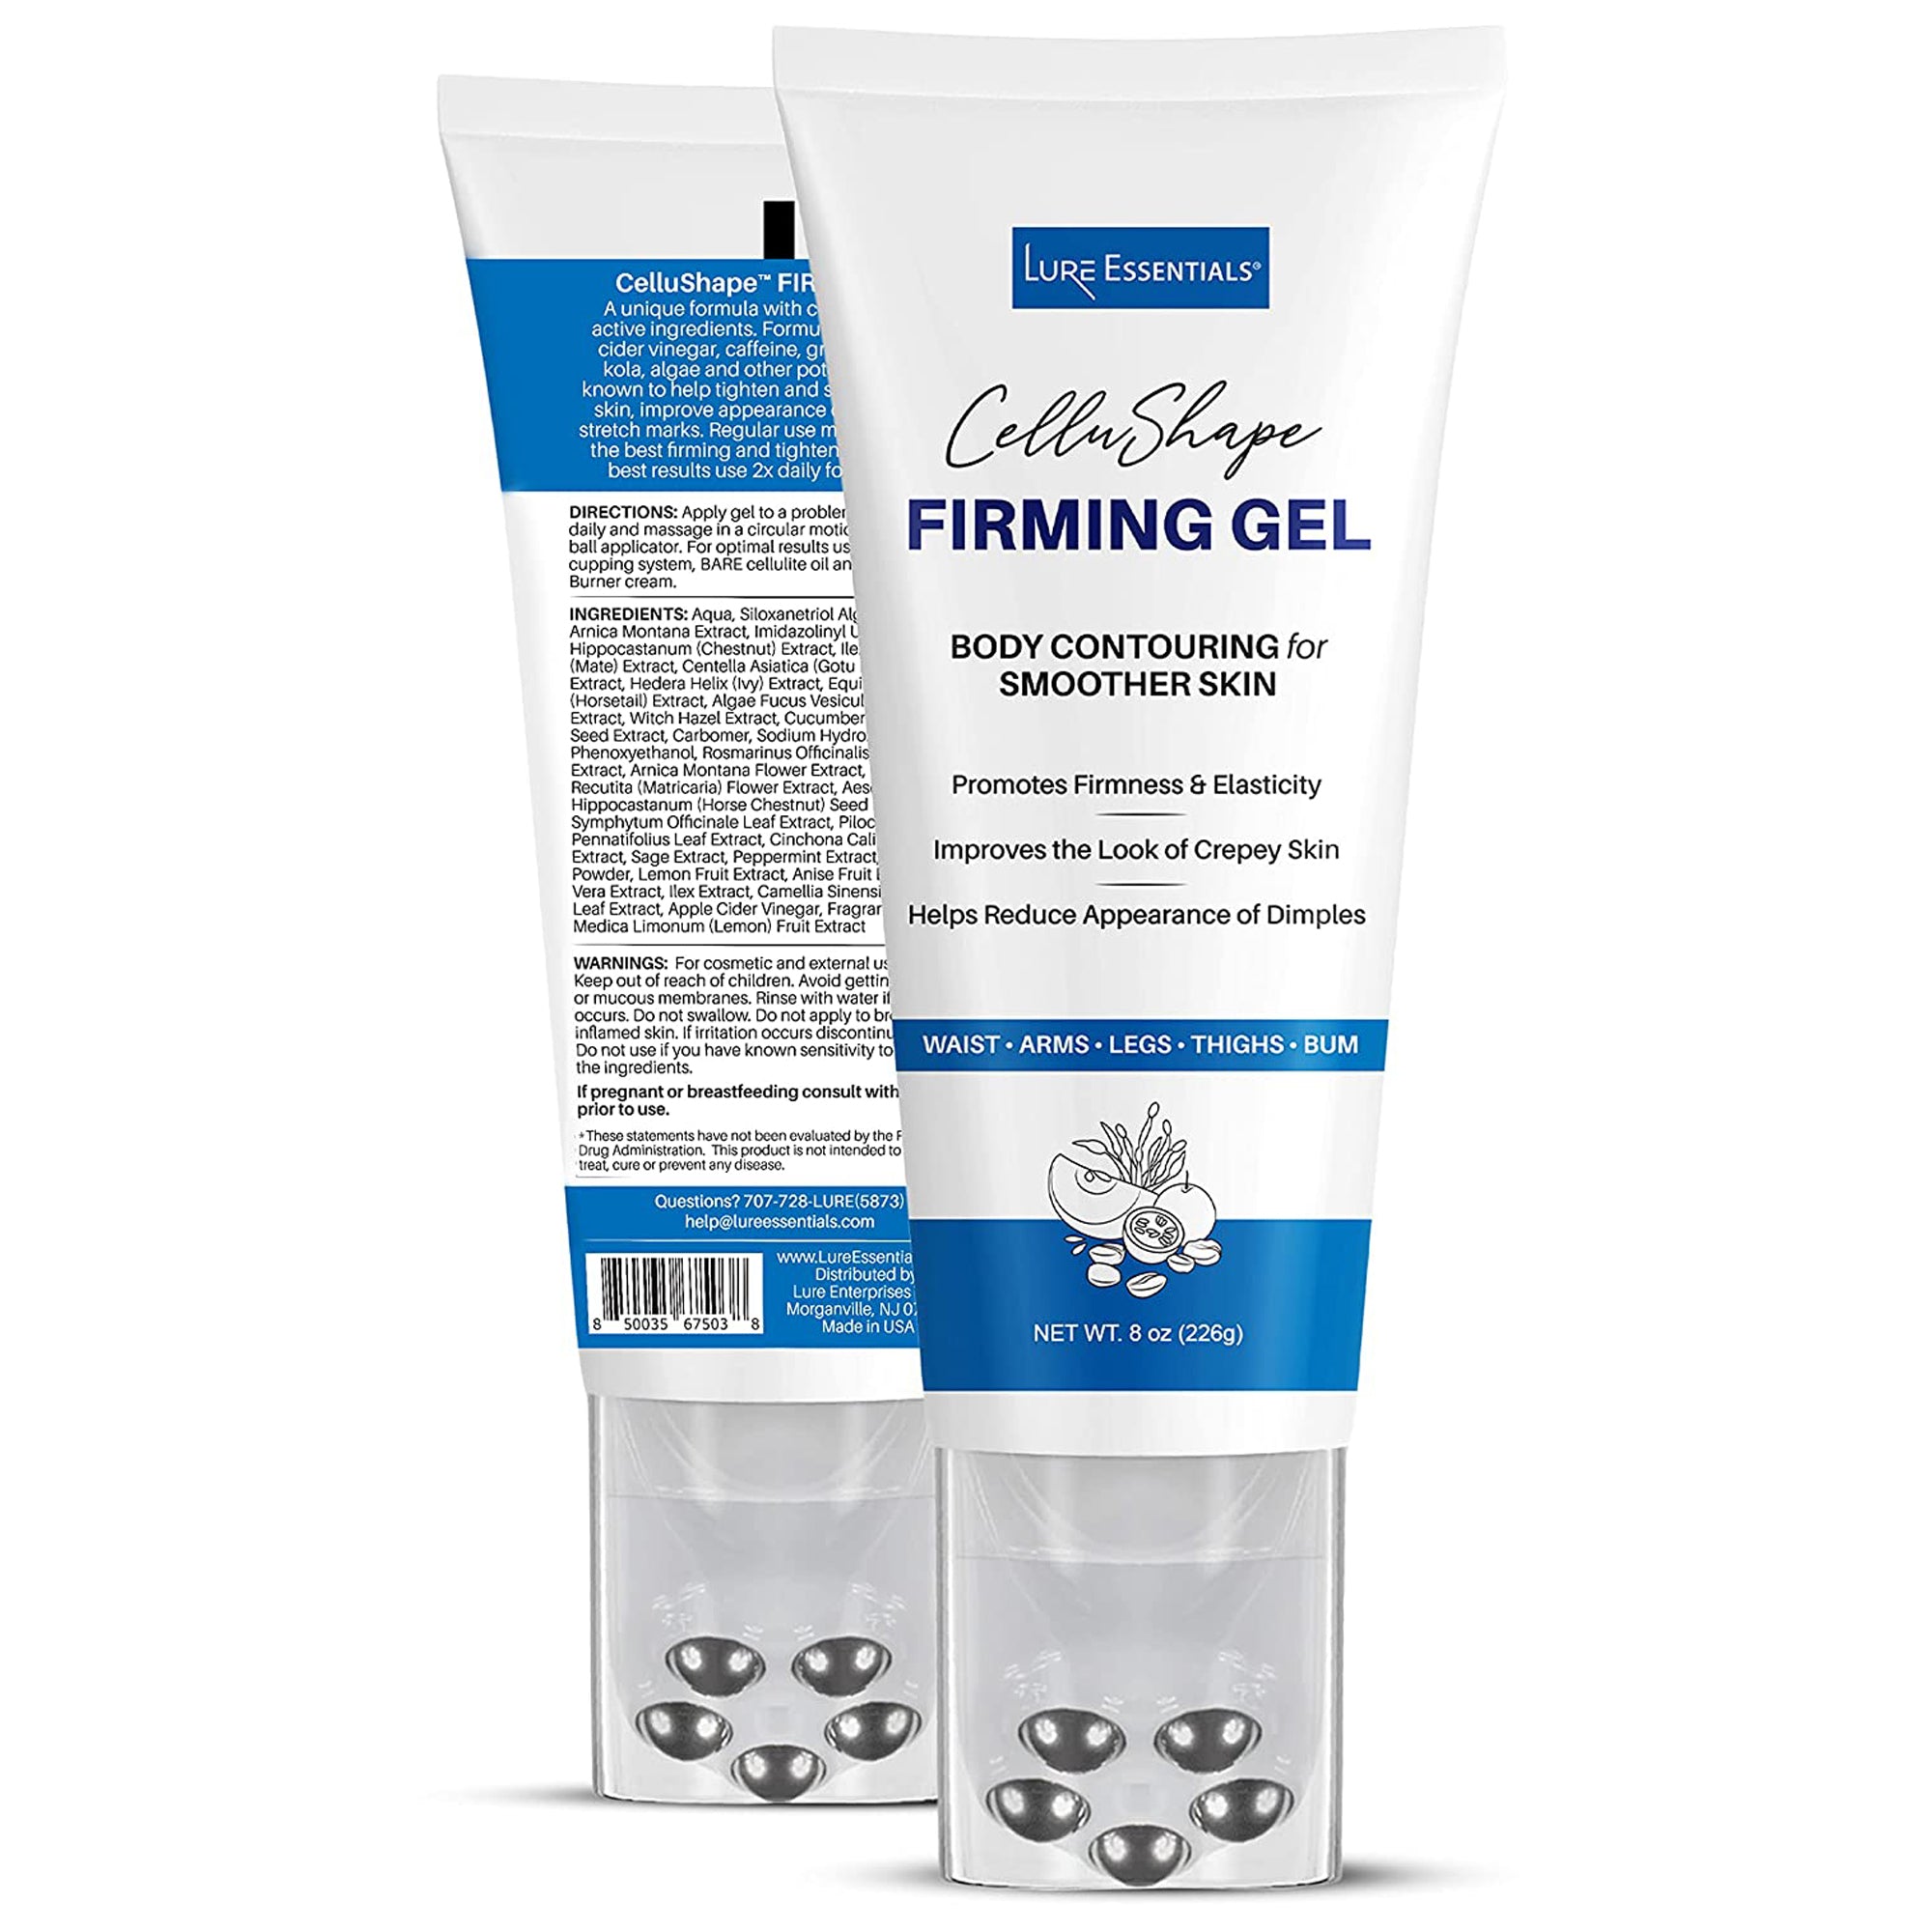 Helps reduce the visible signs of cellulite Two AgeLOC Body Shaping Gel,  One Dermatic Effects +1 Scrub Body Lufra gratis !